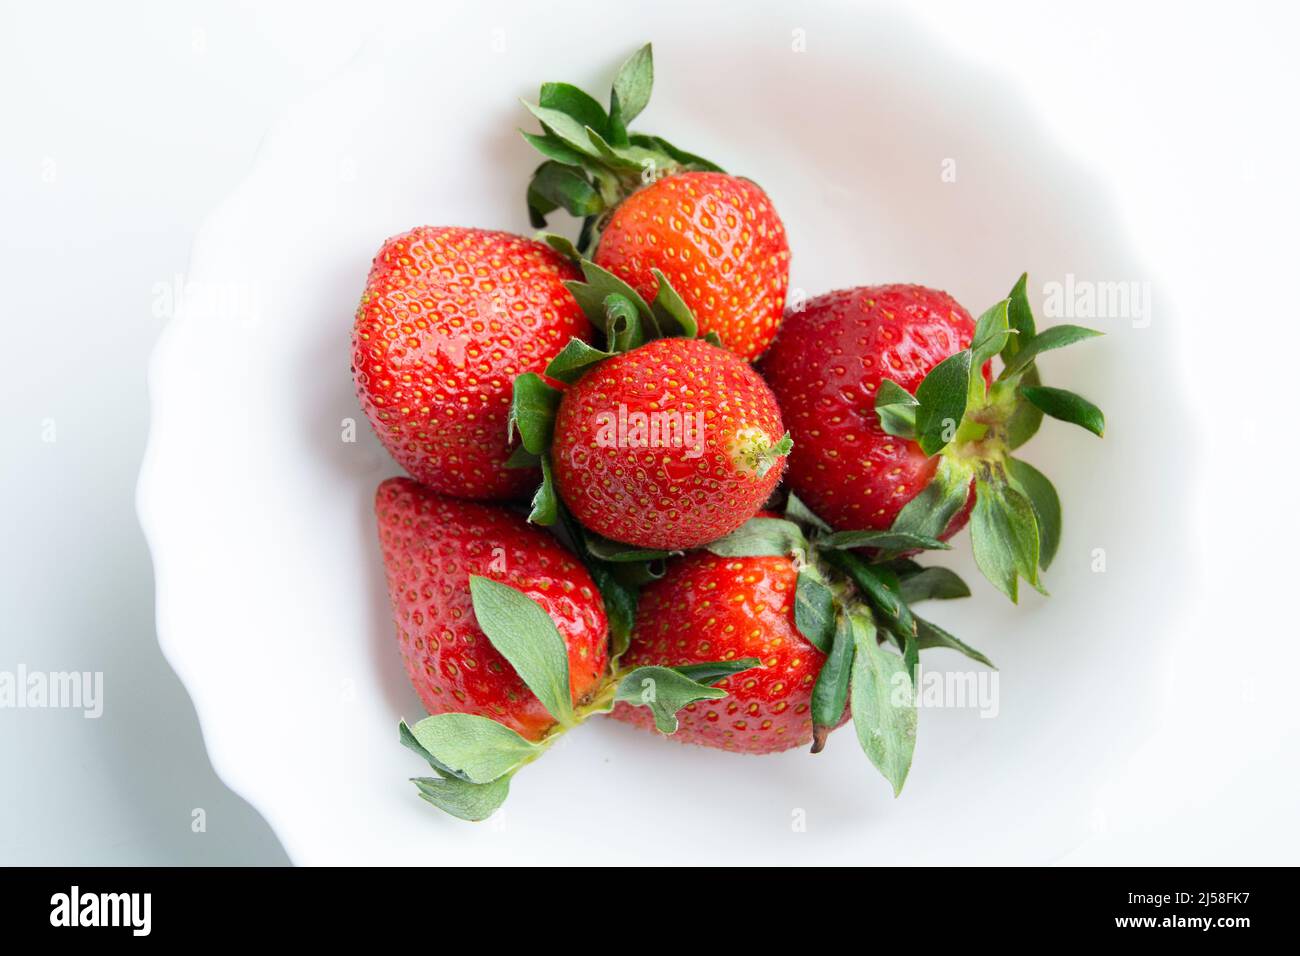 Strawberries in close-up composition. Some bright red berries on a white dish. Fruit seeds, between which one is already beginning to germinate. Stock Photo